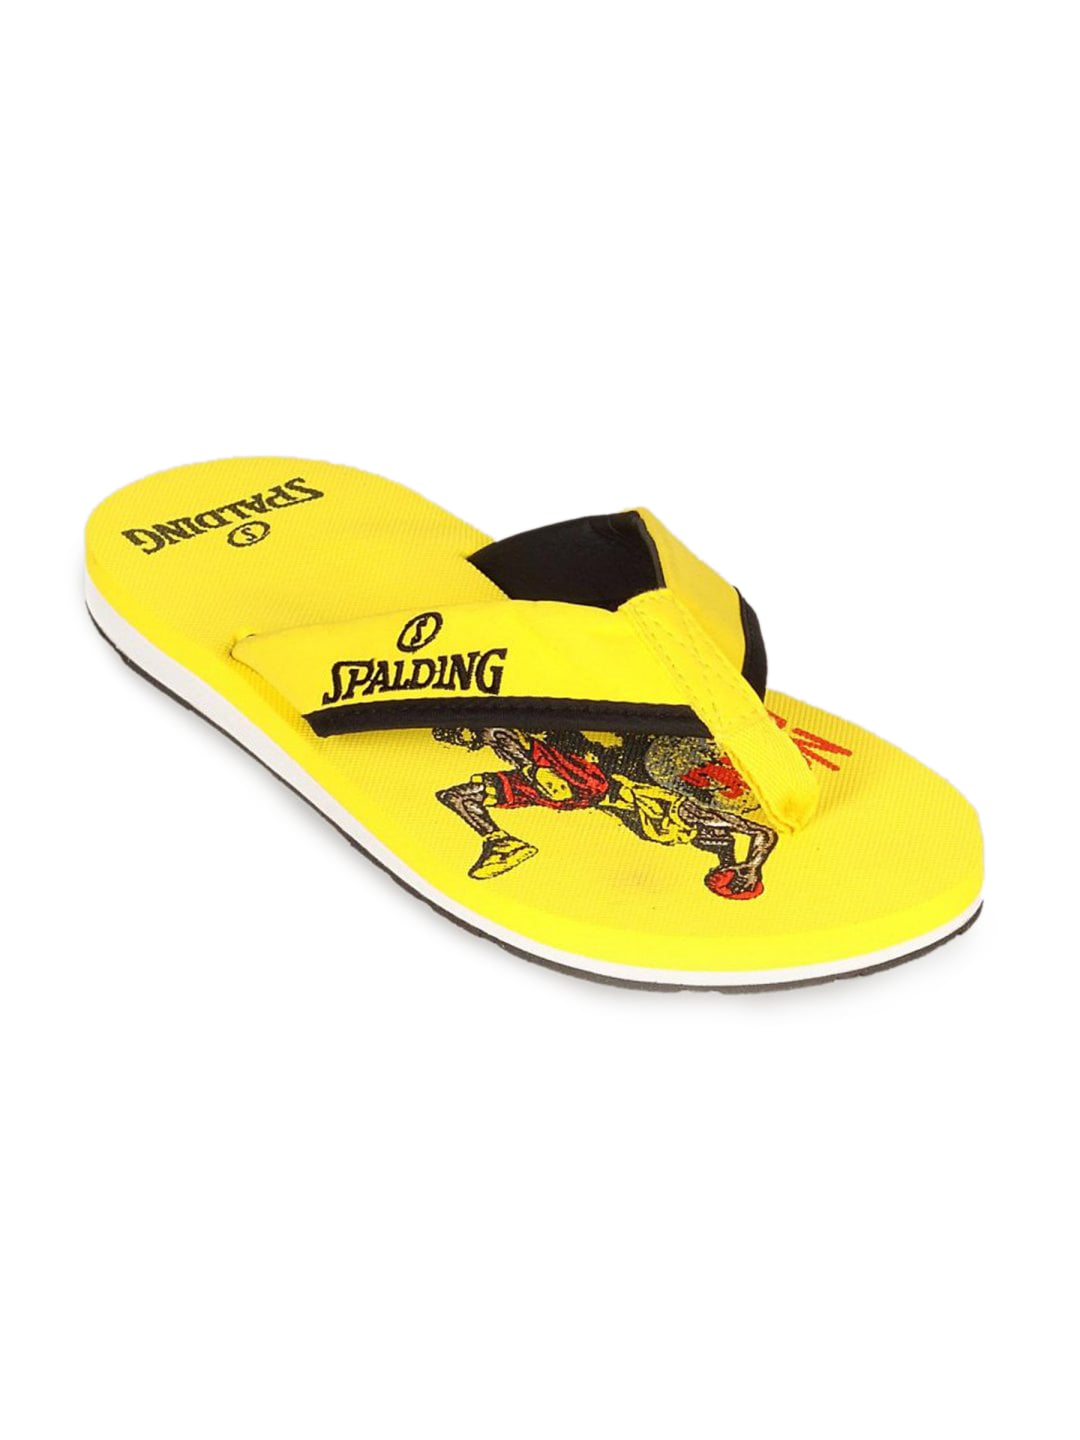 Spalding Men's Yellow And Black With Graphic Flip Flop